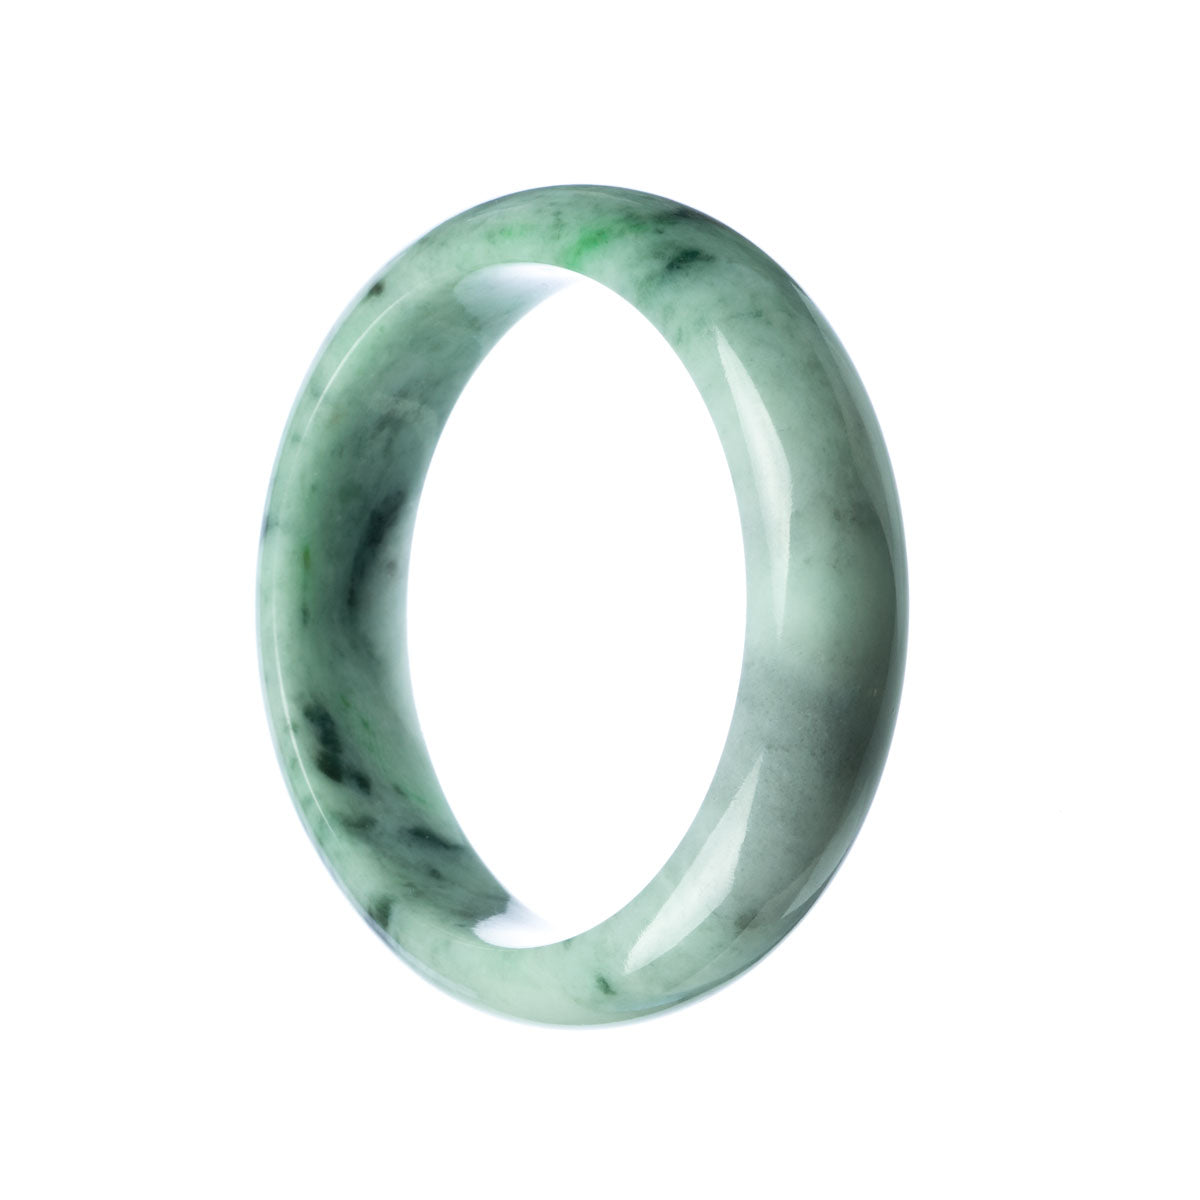 A close-up image of a genuine Type A Green Traditional Jade Bracelet. The bracelet has a half moon shape and measures 59mm in size. It is a product from MAYS GEMS.